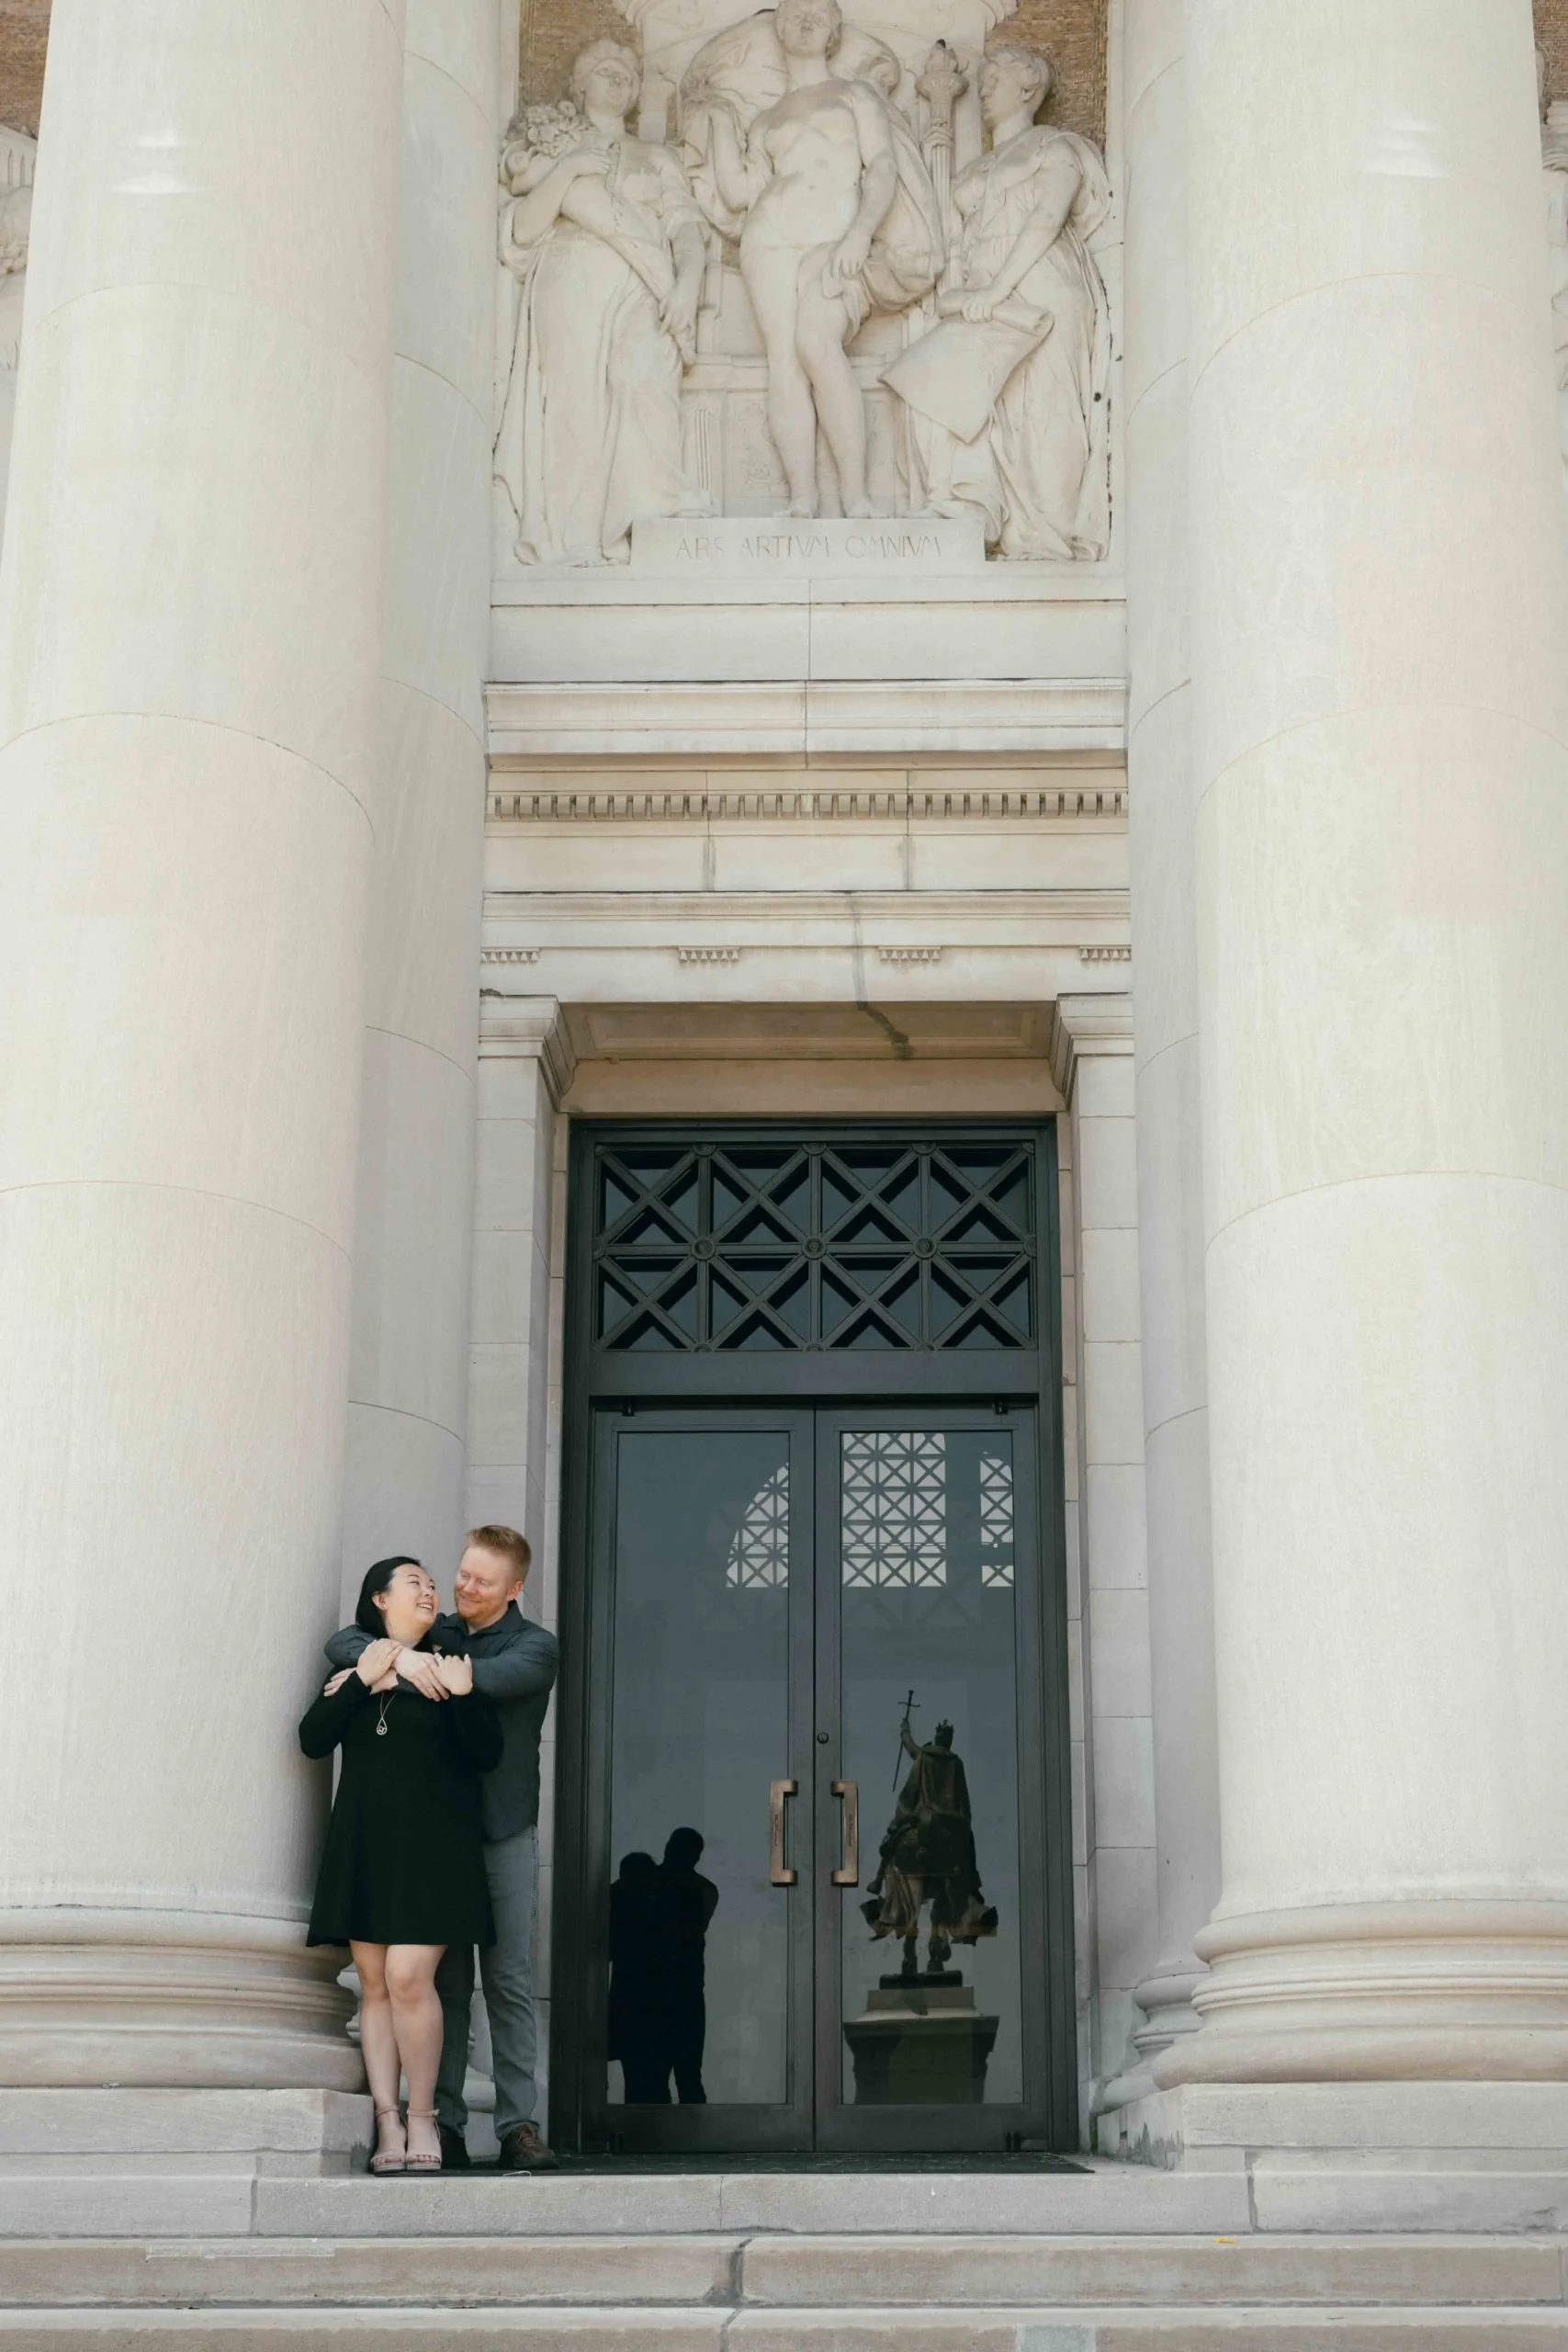 A couple embracing in front of a historic art museum in Saint Louis, Missouri with Greek-style columns, shot by Stacey Vandas with a nostalgic film style.